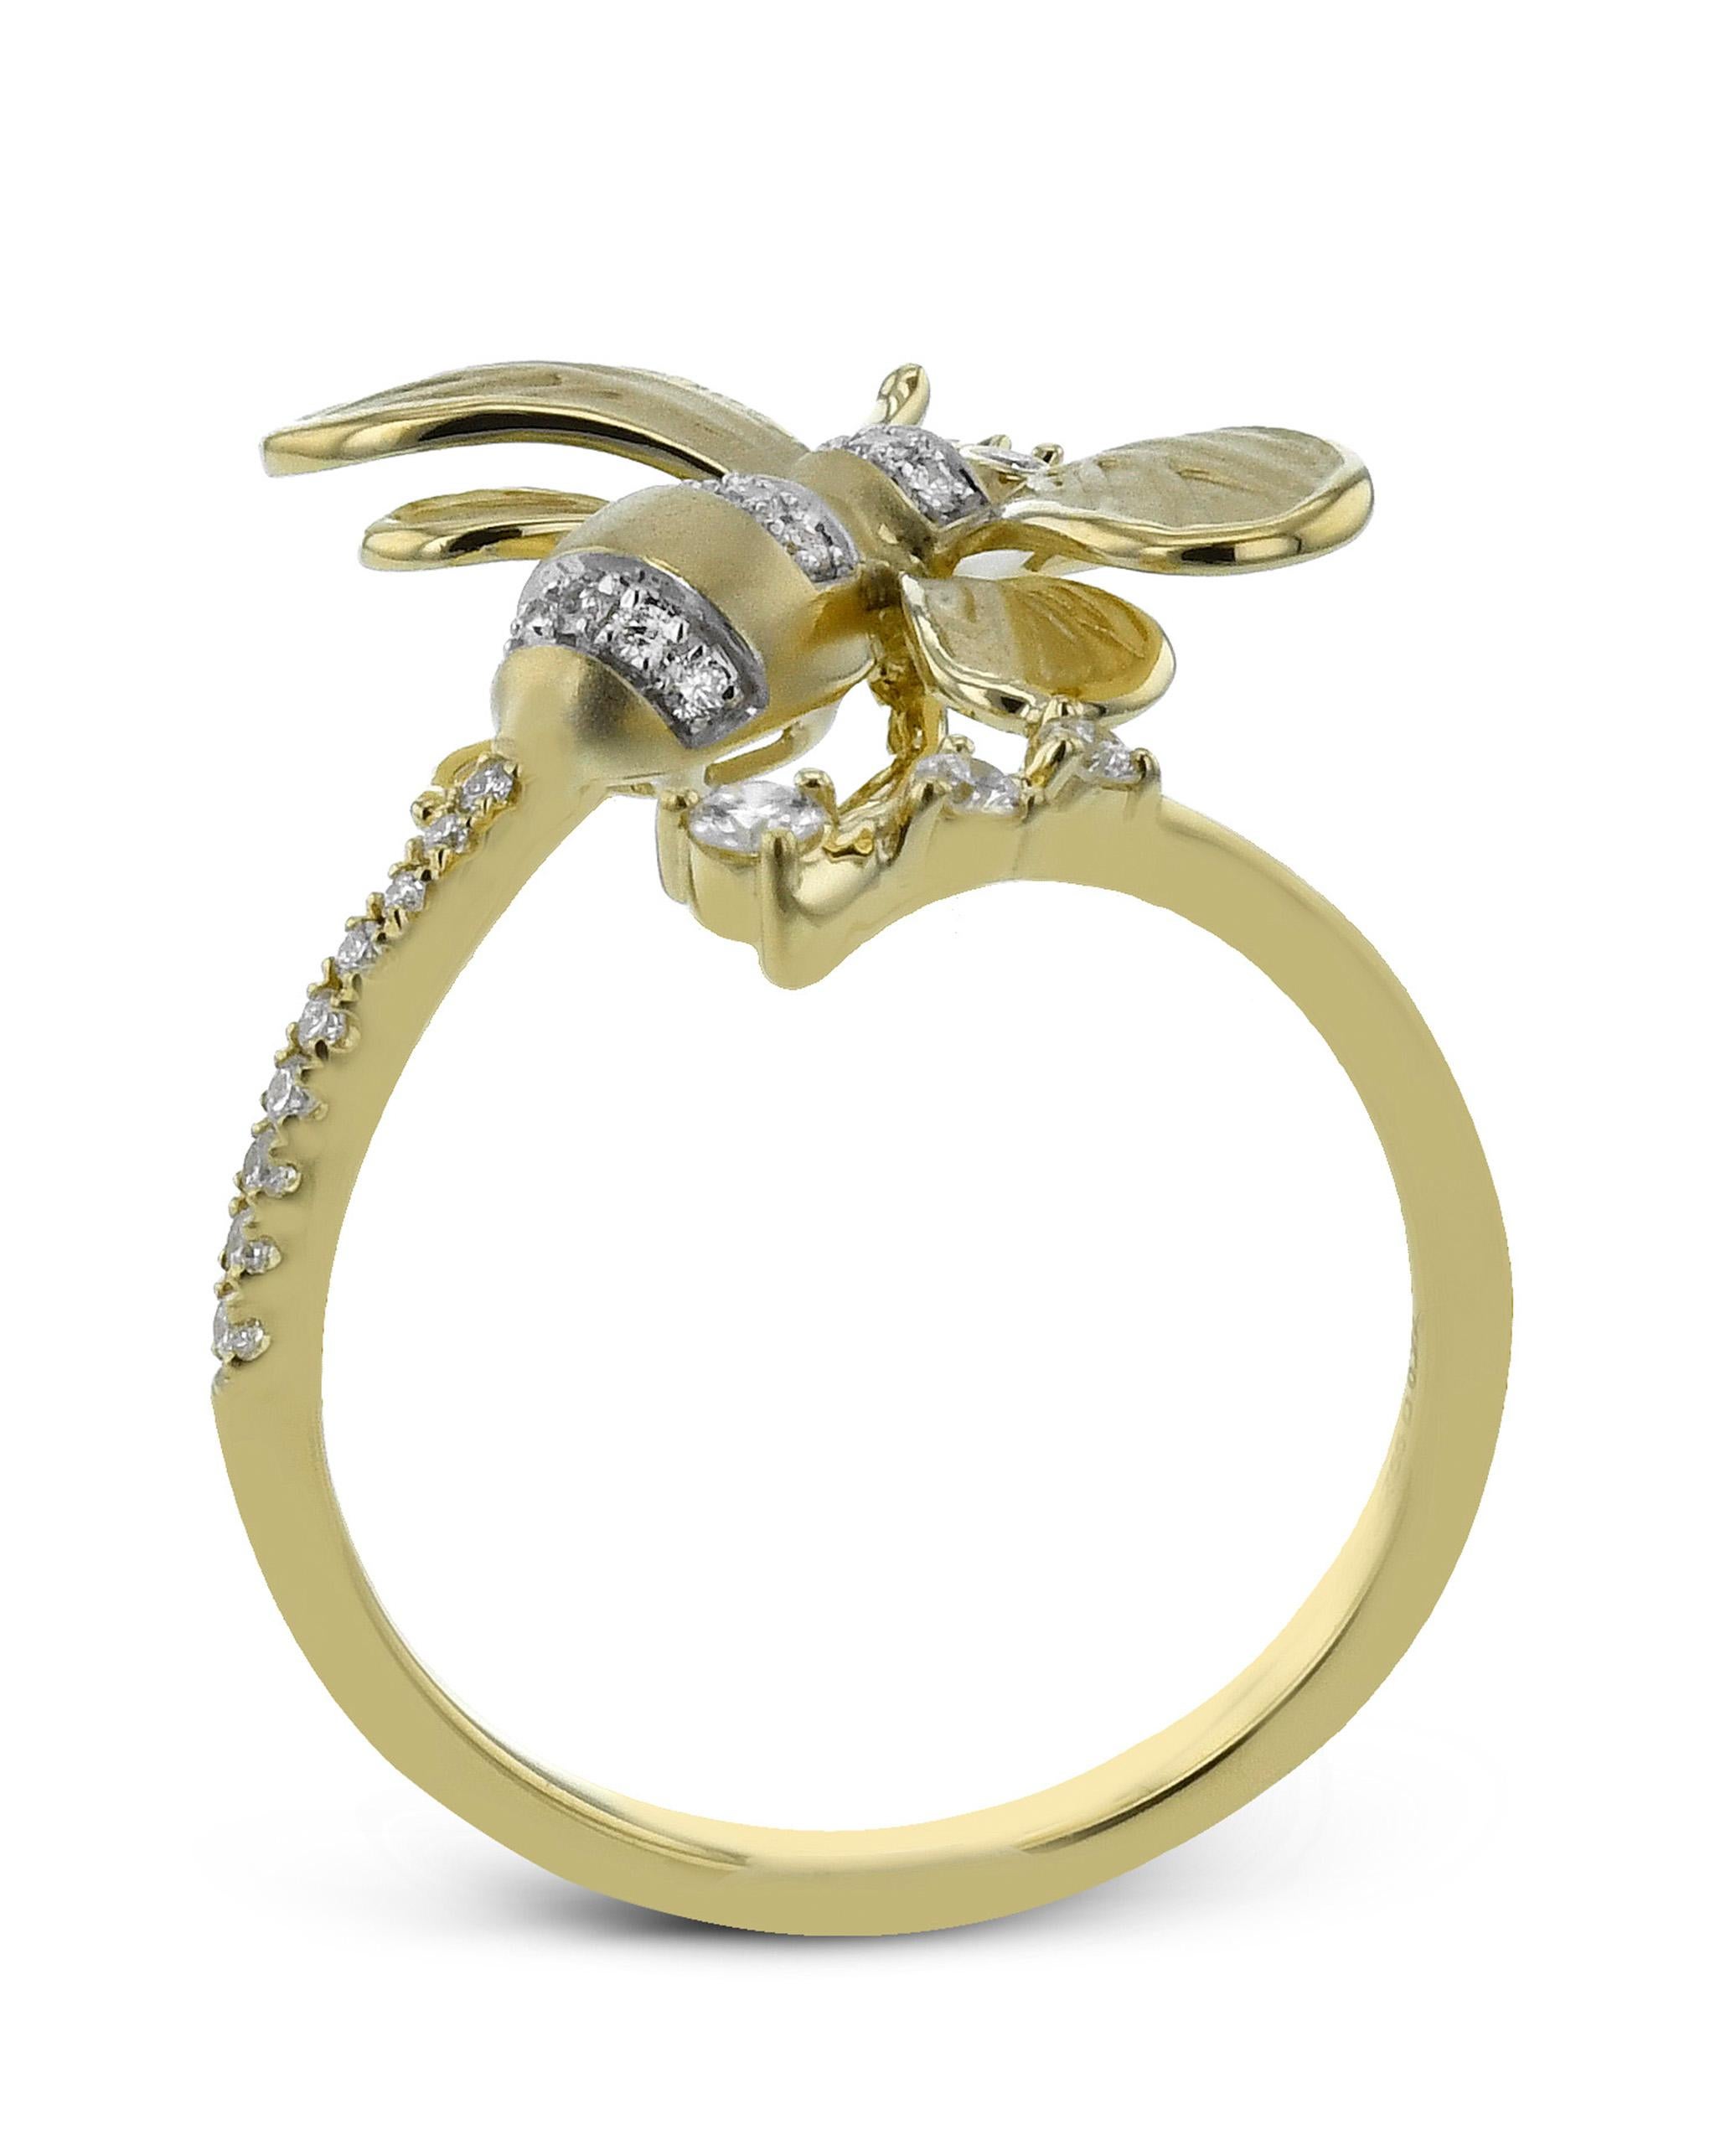 18K yellow gold queen bee wrap around ring by Simon G. The ring is made of 18K yellow gold and furnished with 24 round diamonds 0.22 carat and 2 round emeralds 0.02 carat.

- Finger size
- Diamonds are G color, VS clarity.